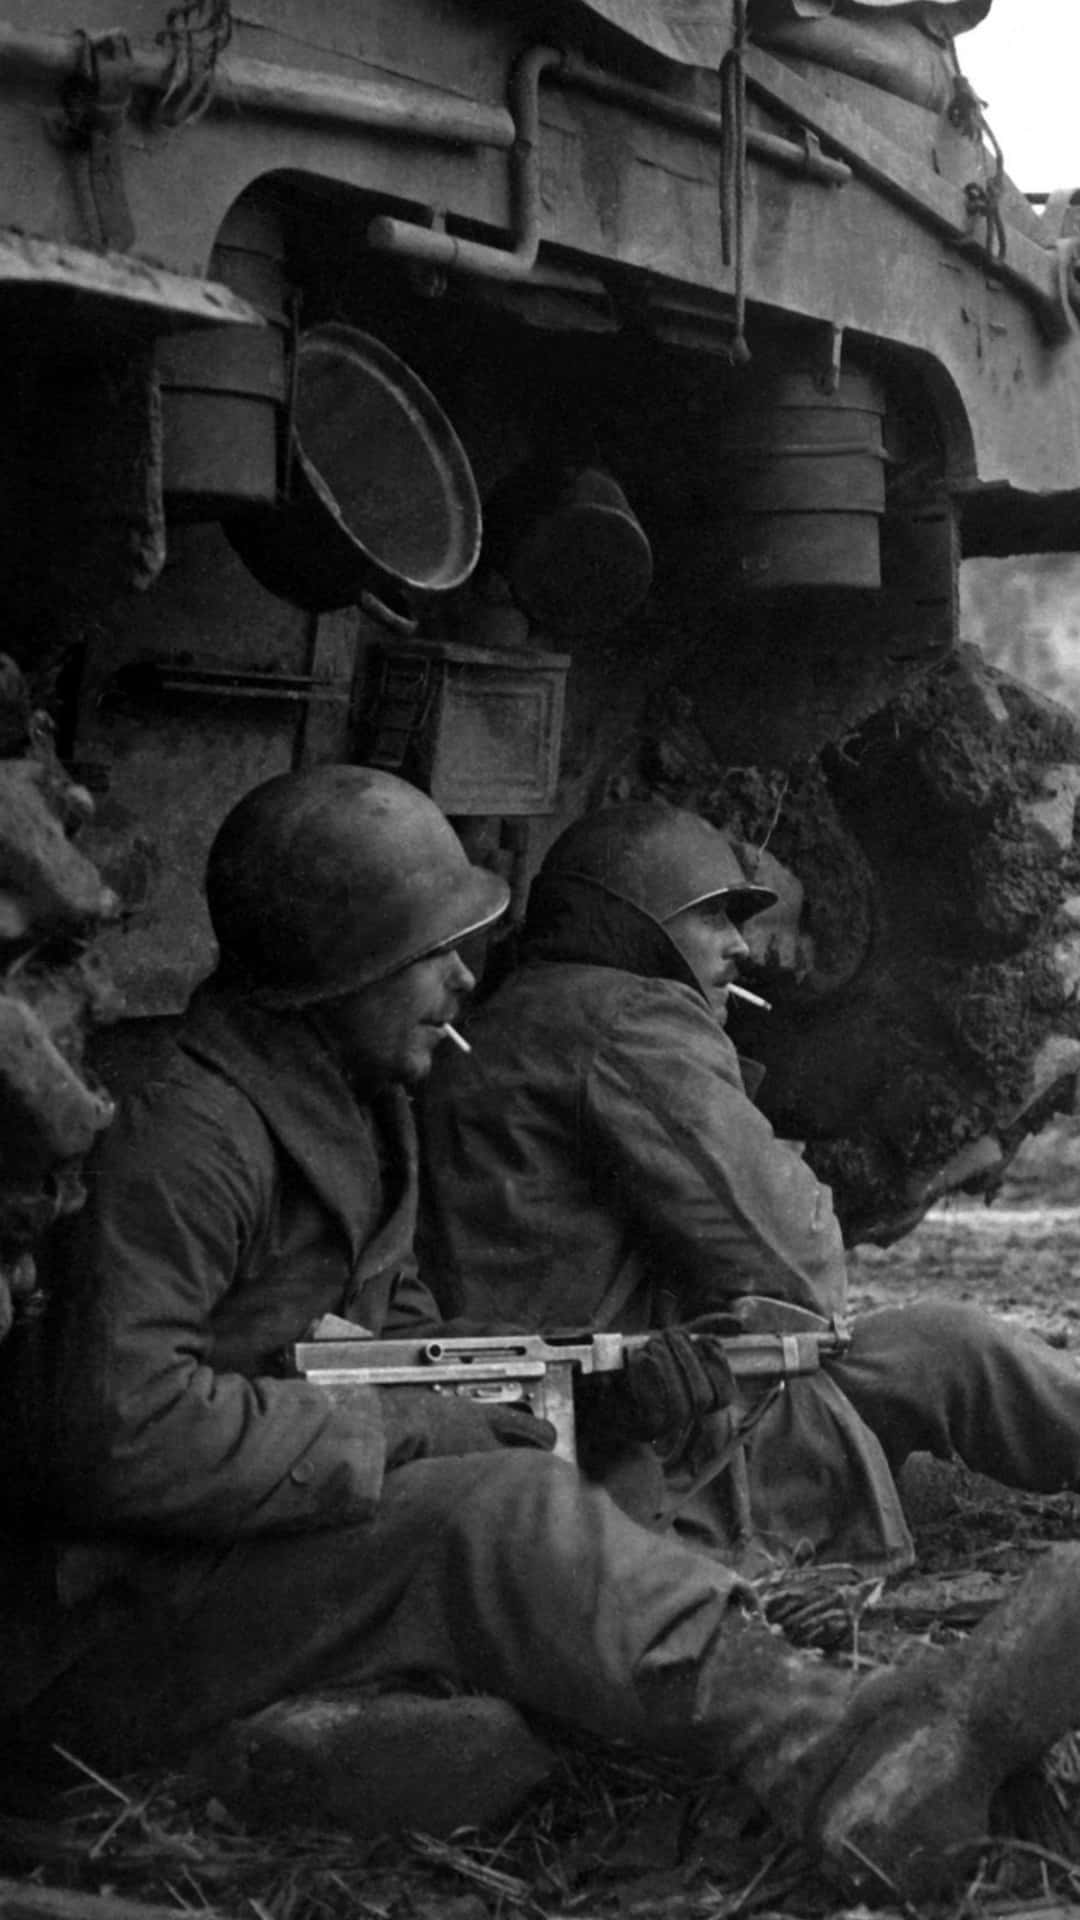 Ww2 Iphone Soldiers Sitting Bw Wallpaper